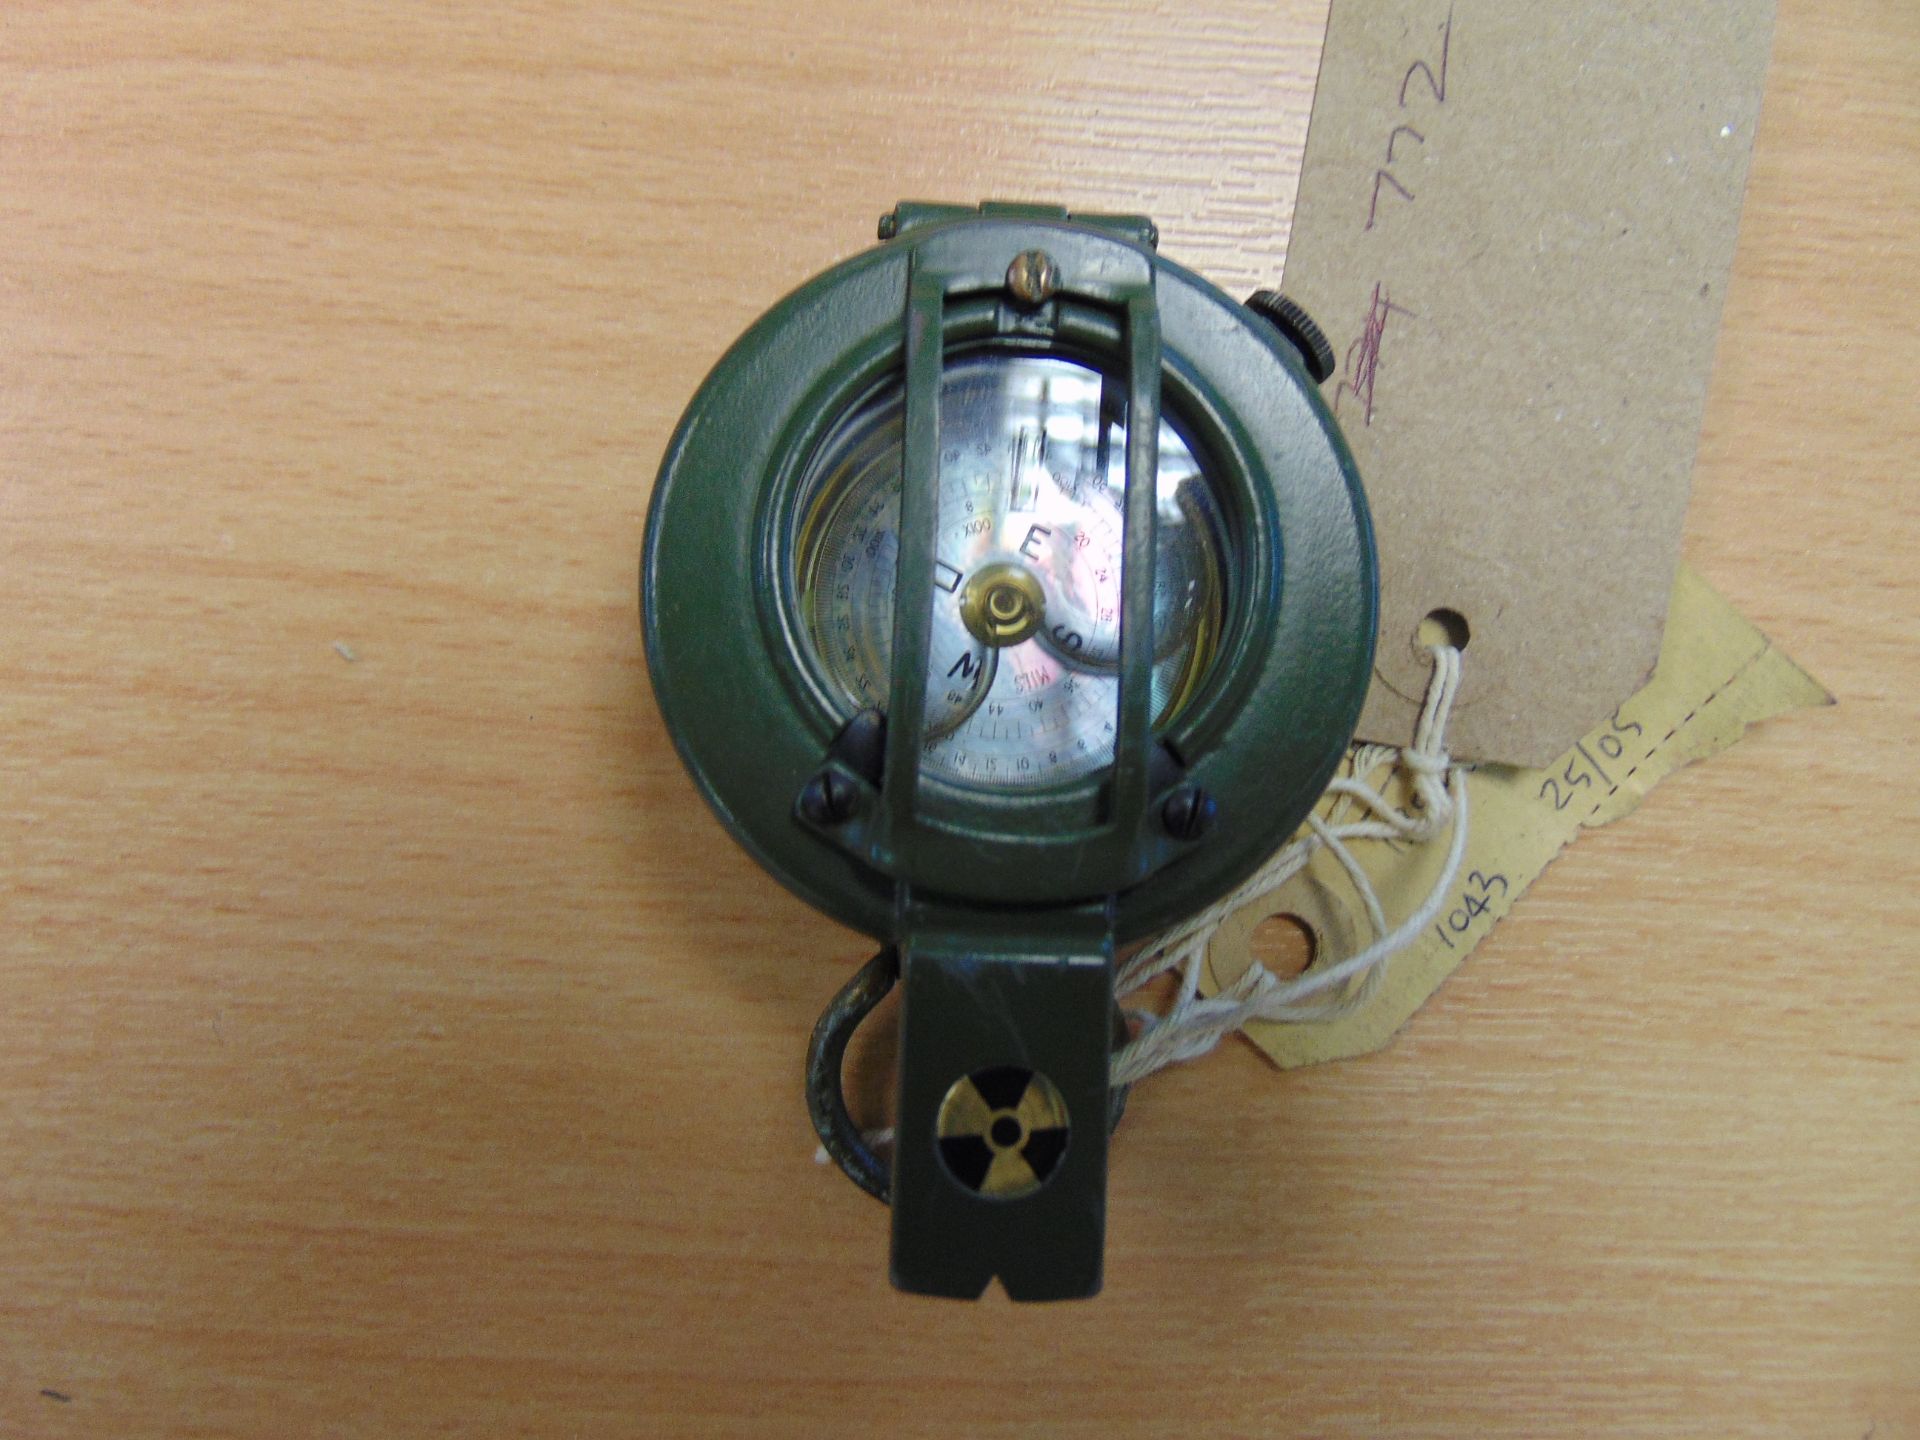 SIRS Type G150 British Army Brass Prismatic Compass - Image 5 of 5